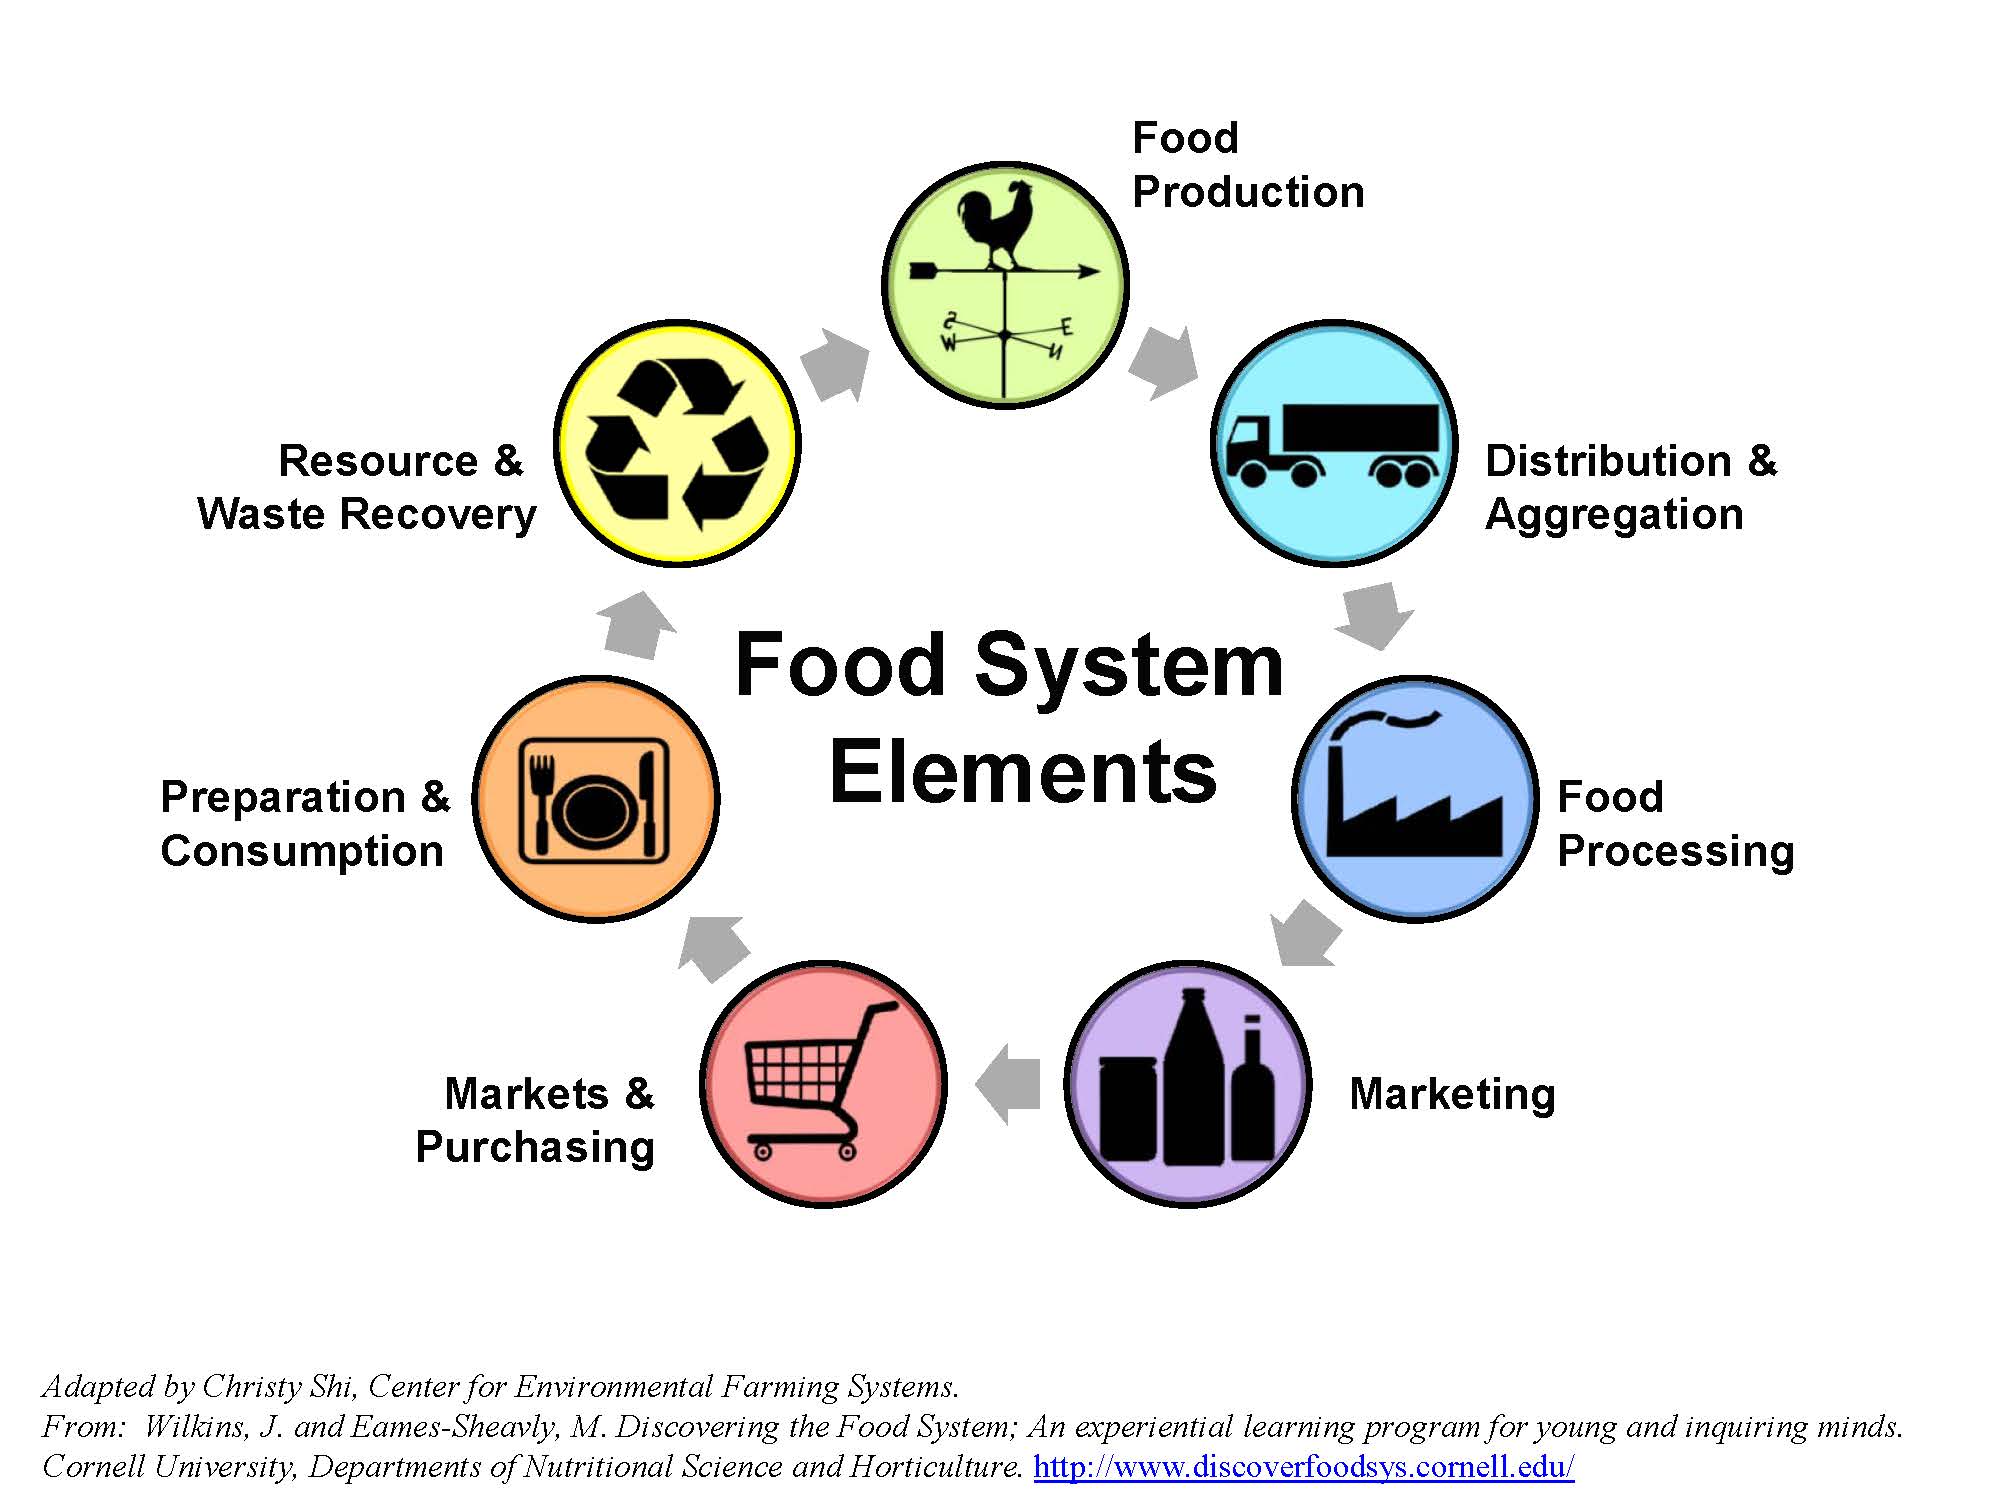 Food System Elements infographic